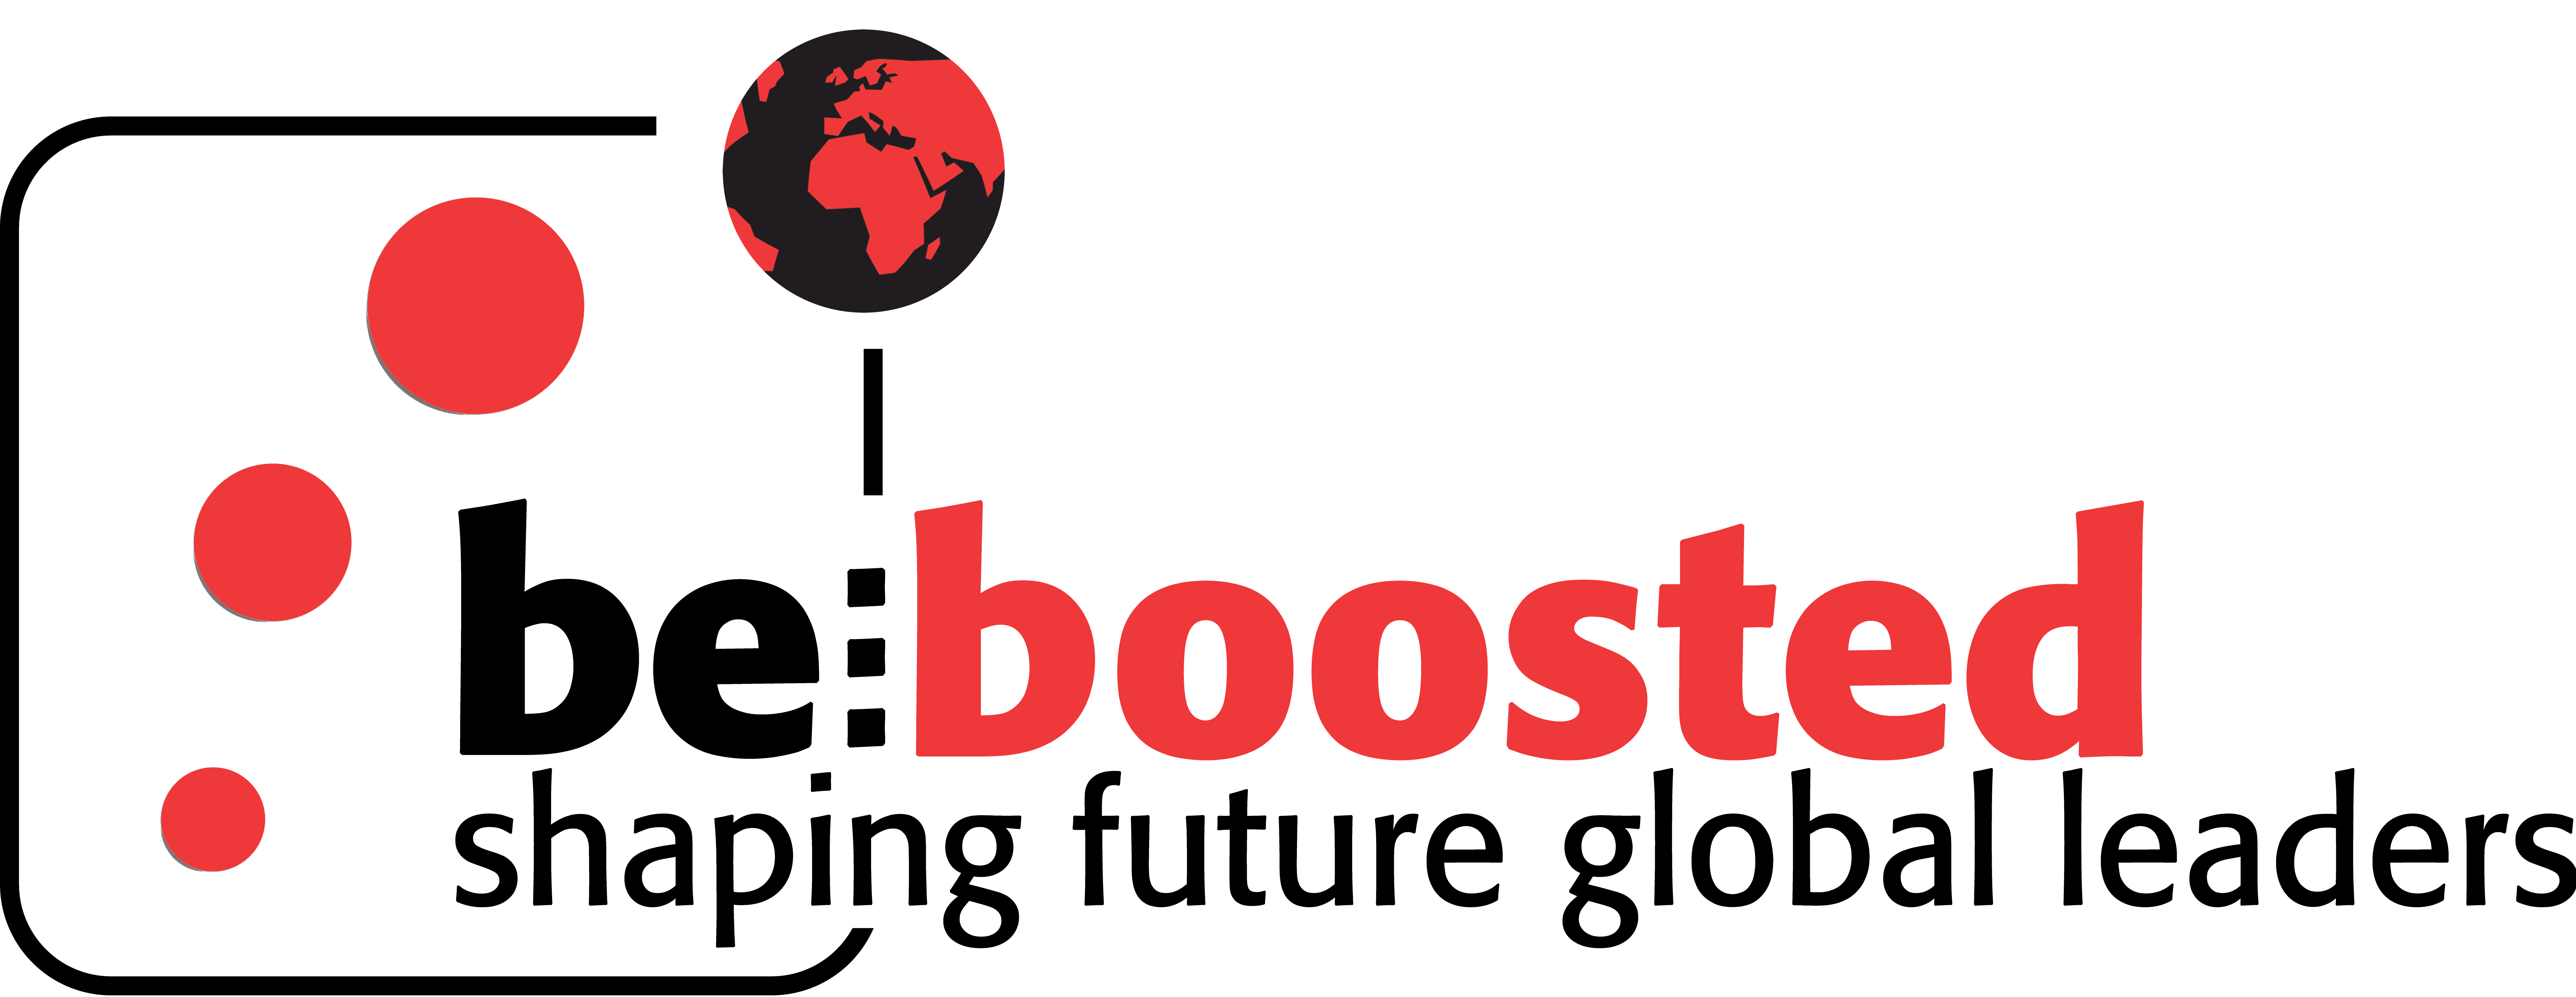 be-boosted